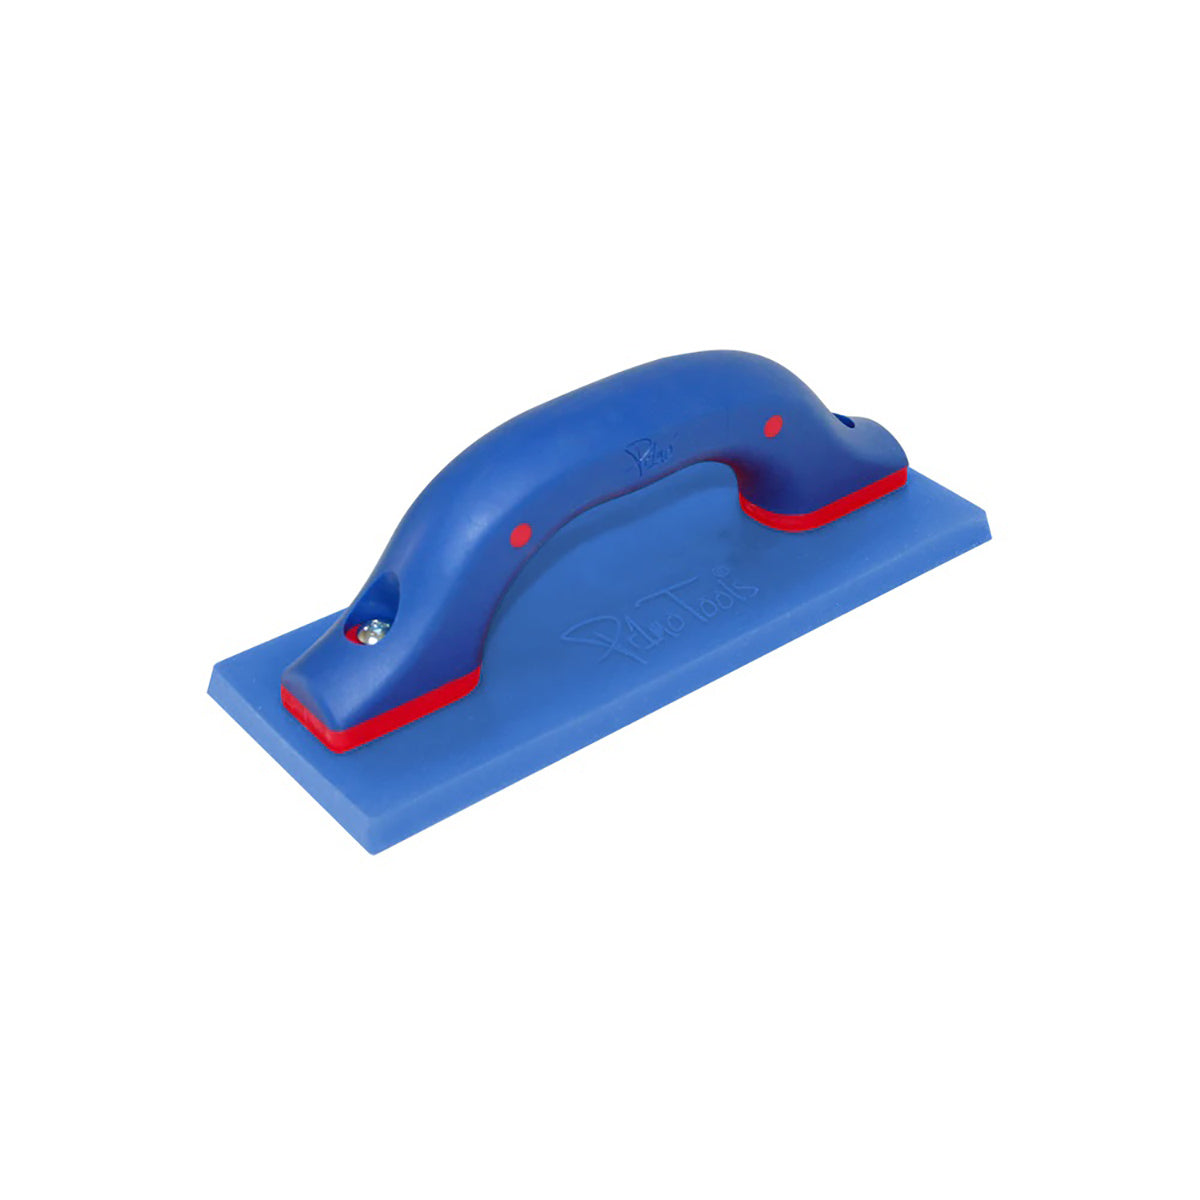 Primo Tools TruBlue Grout Float